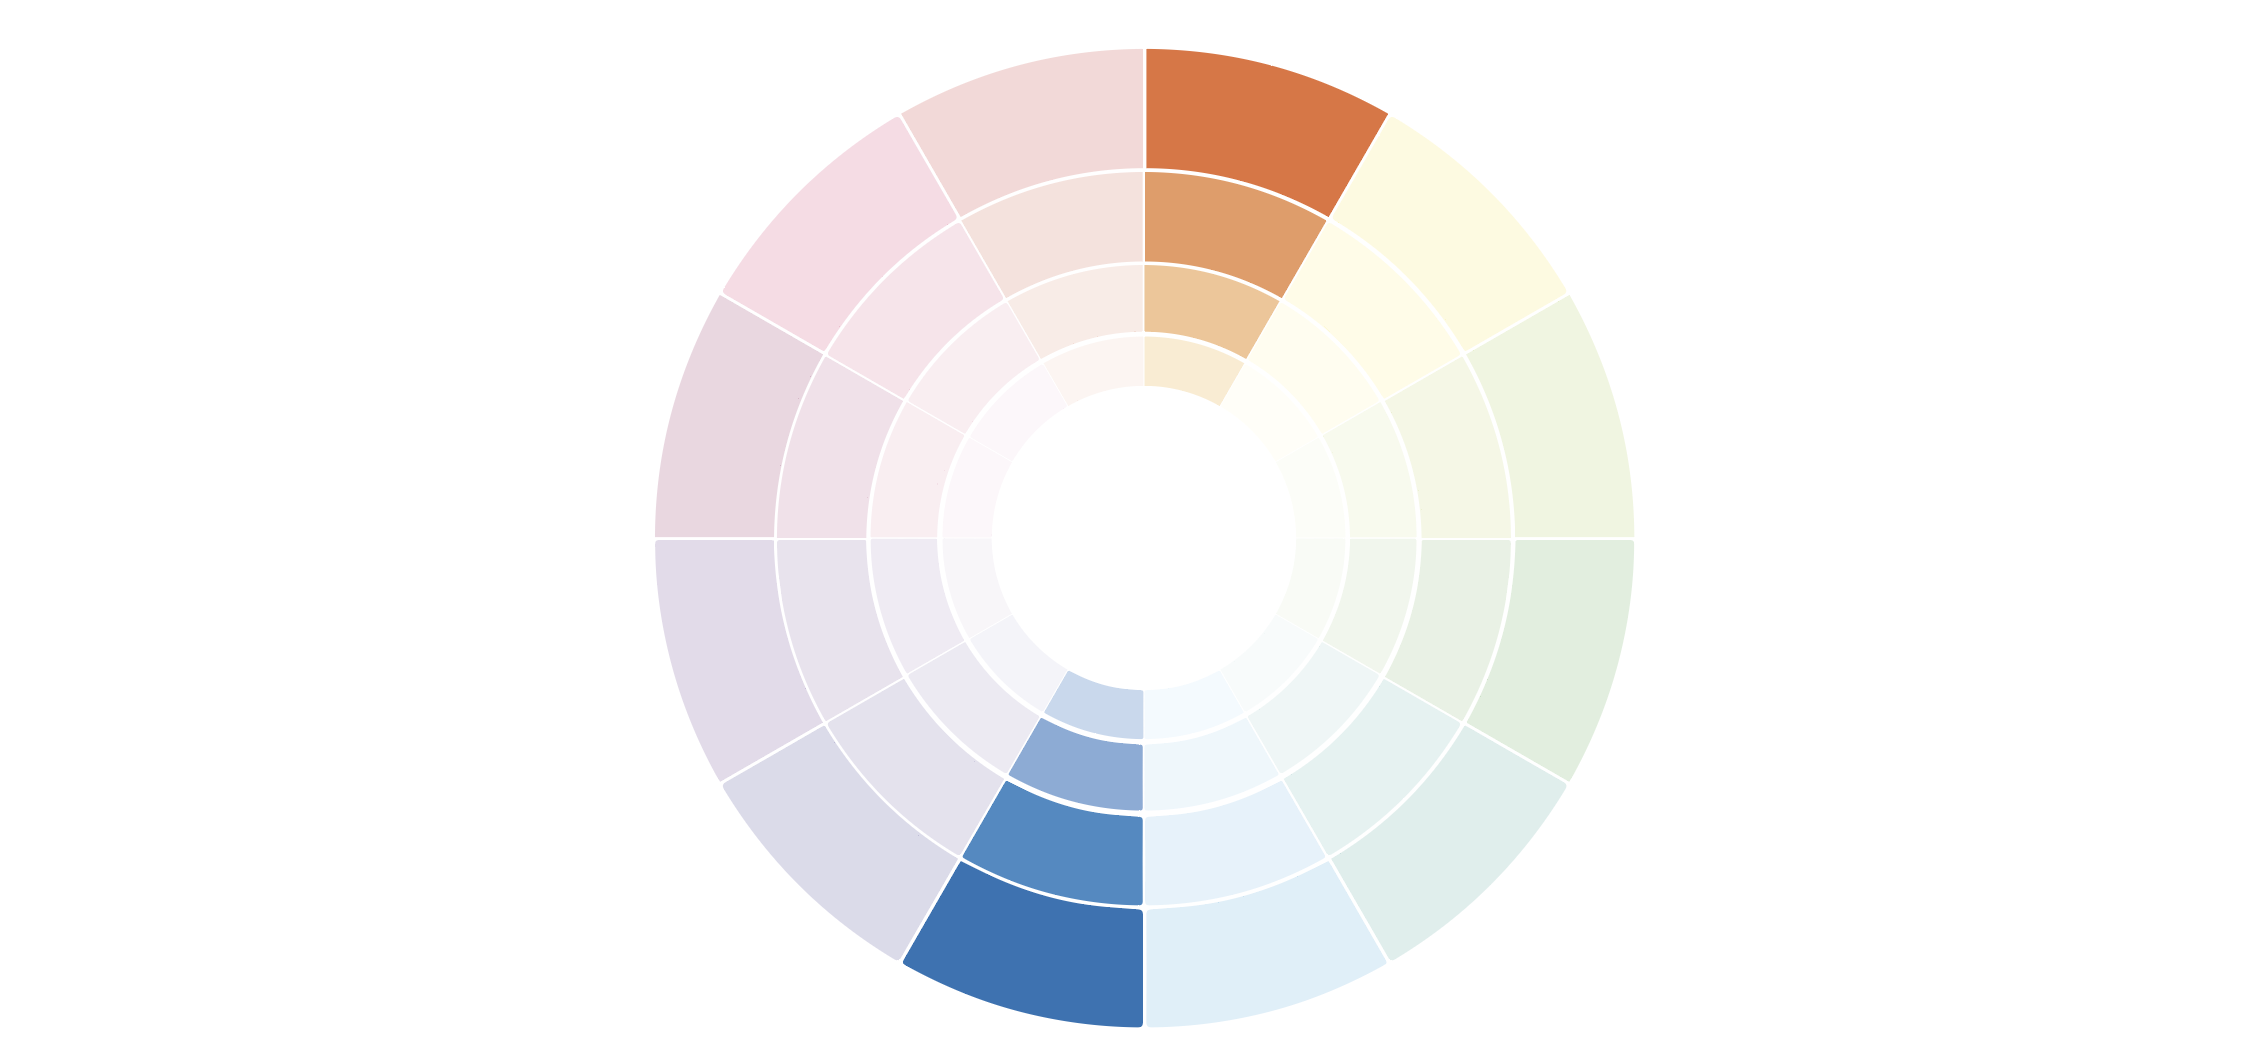 generate matching color palette from image